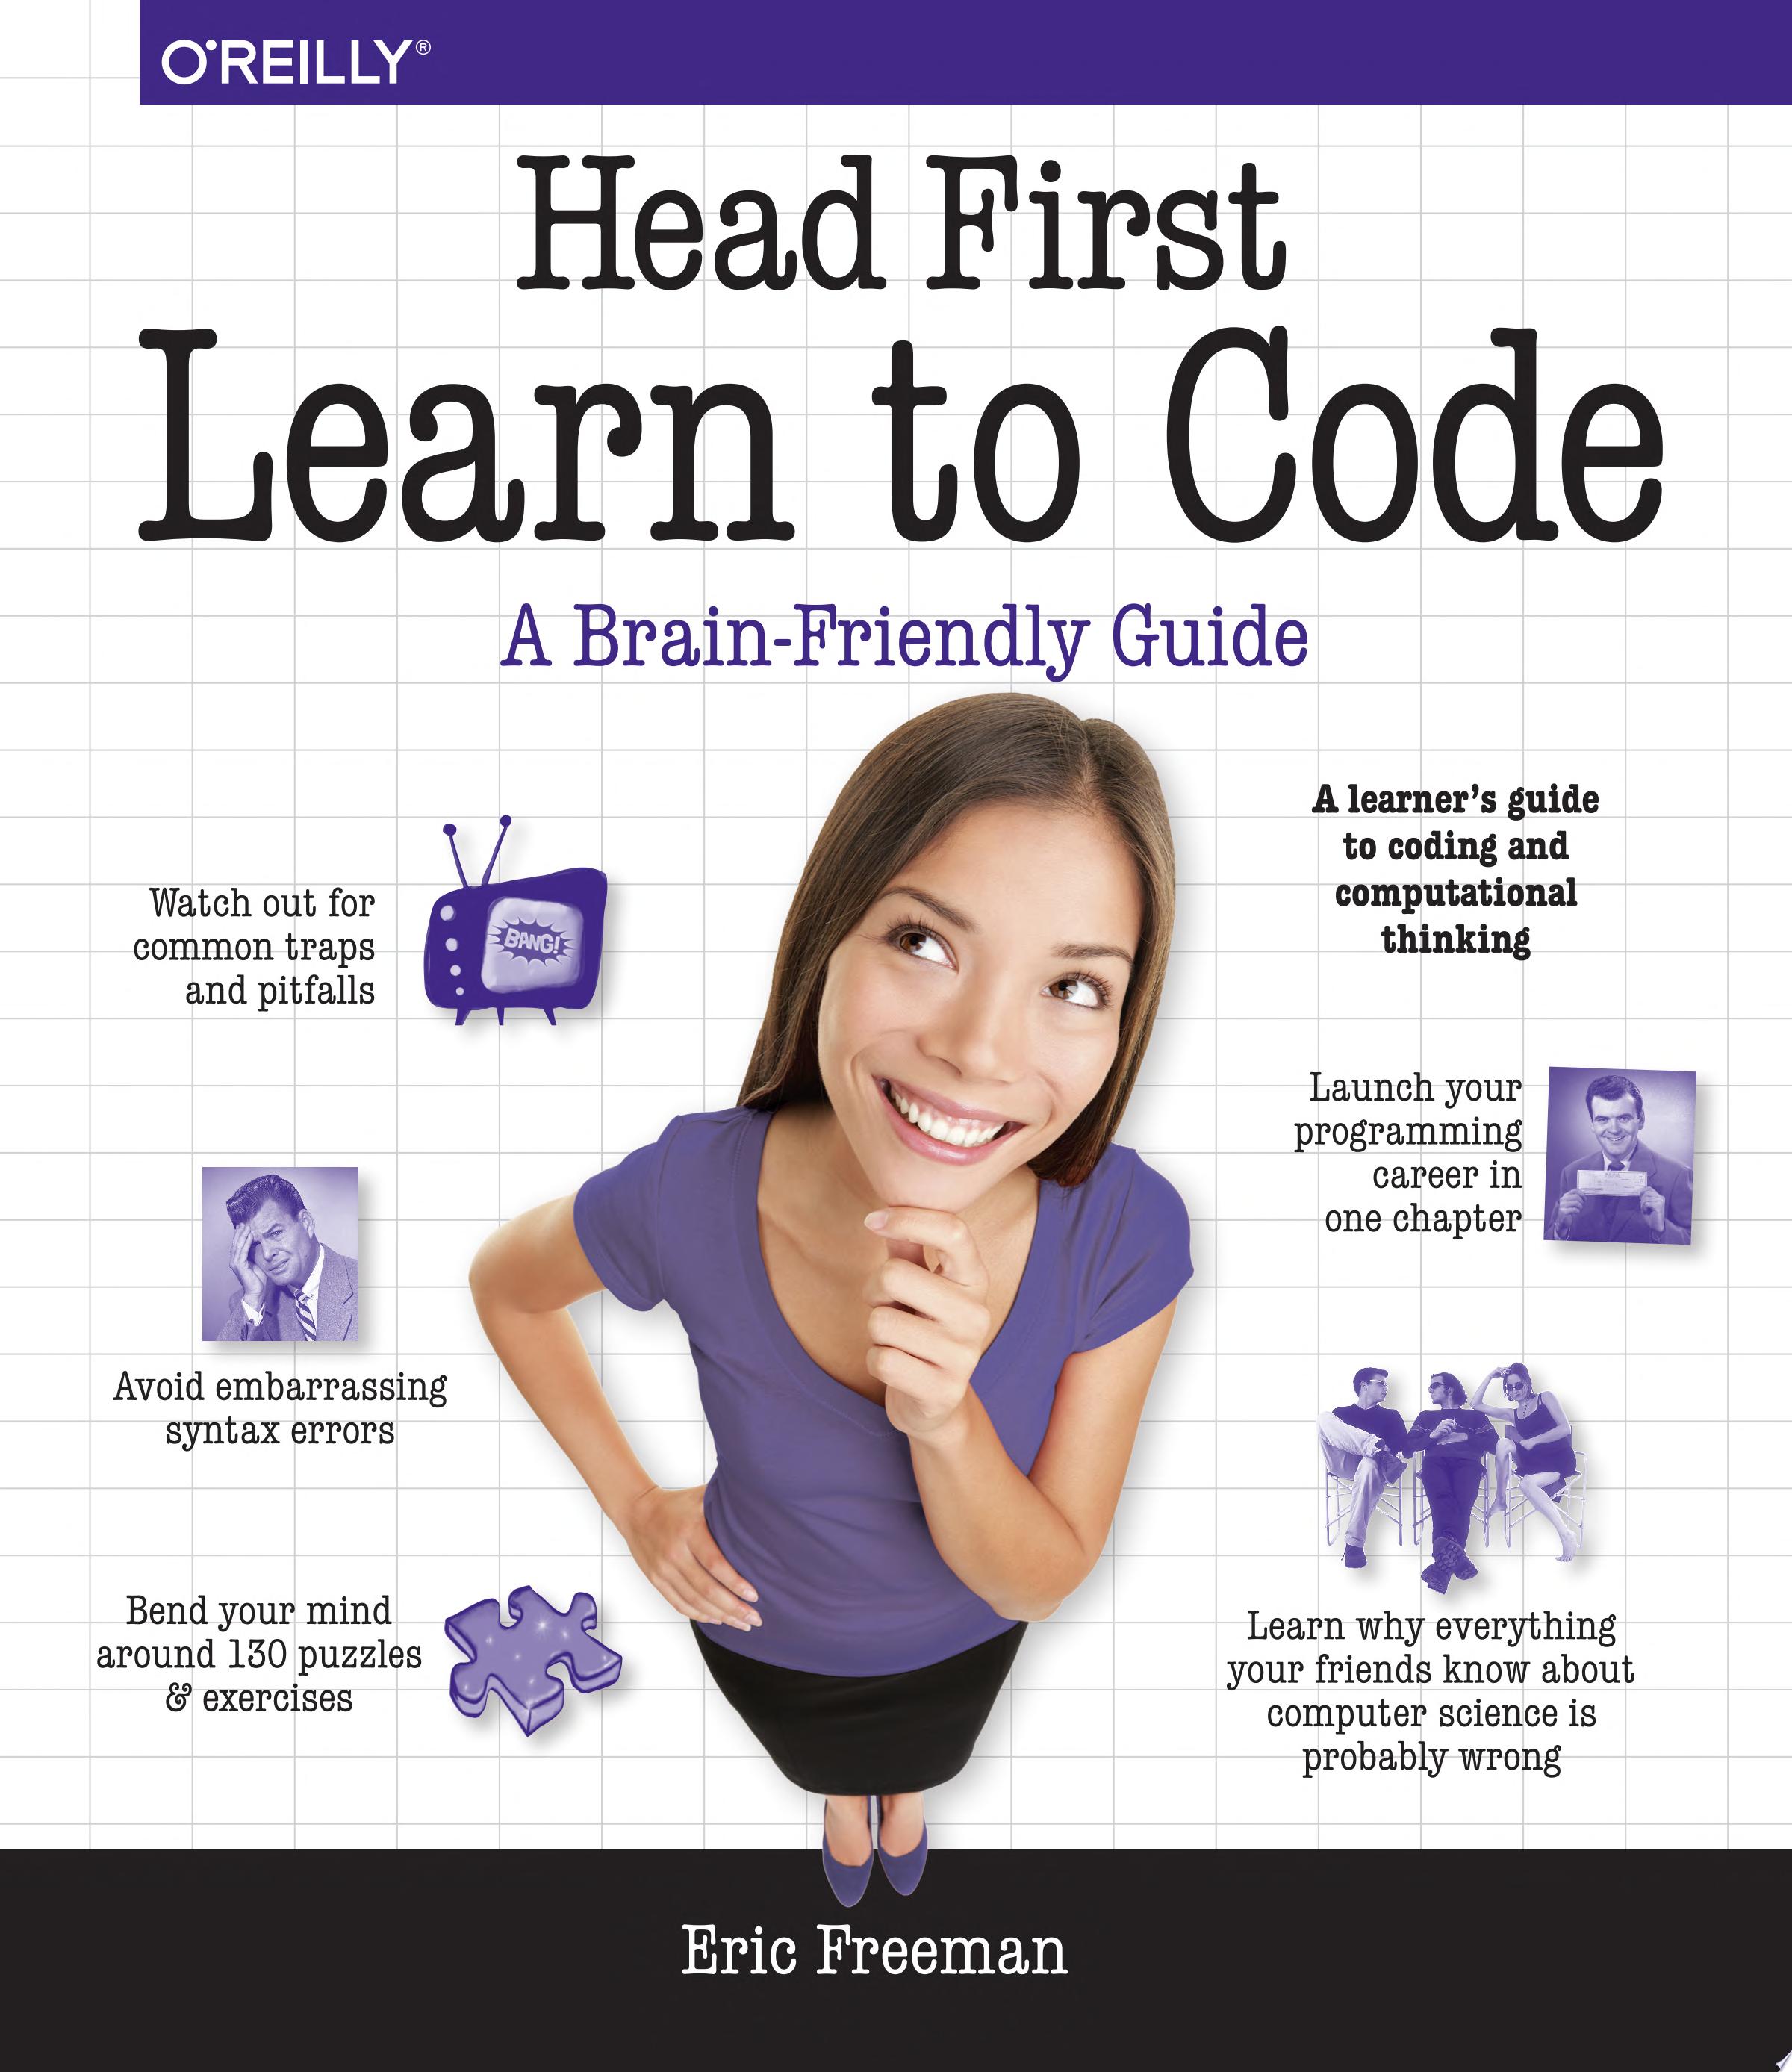 Image for "Head First Learn to Code"